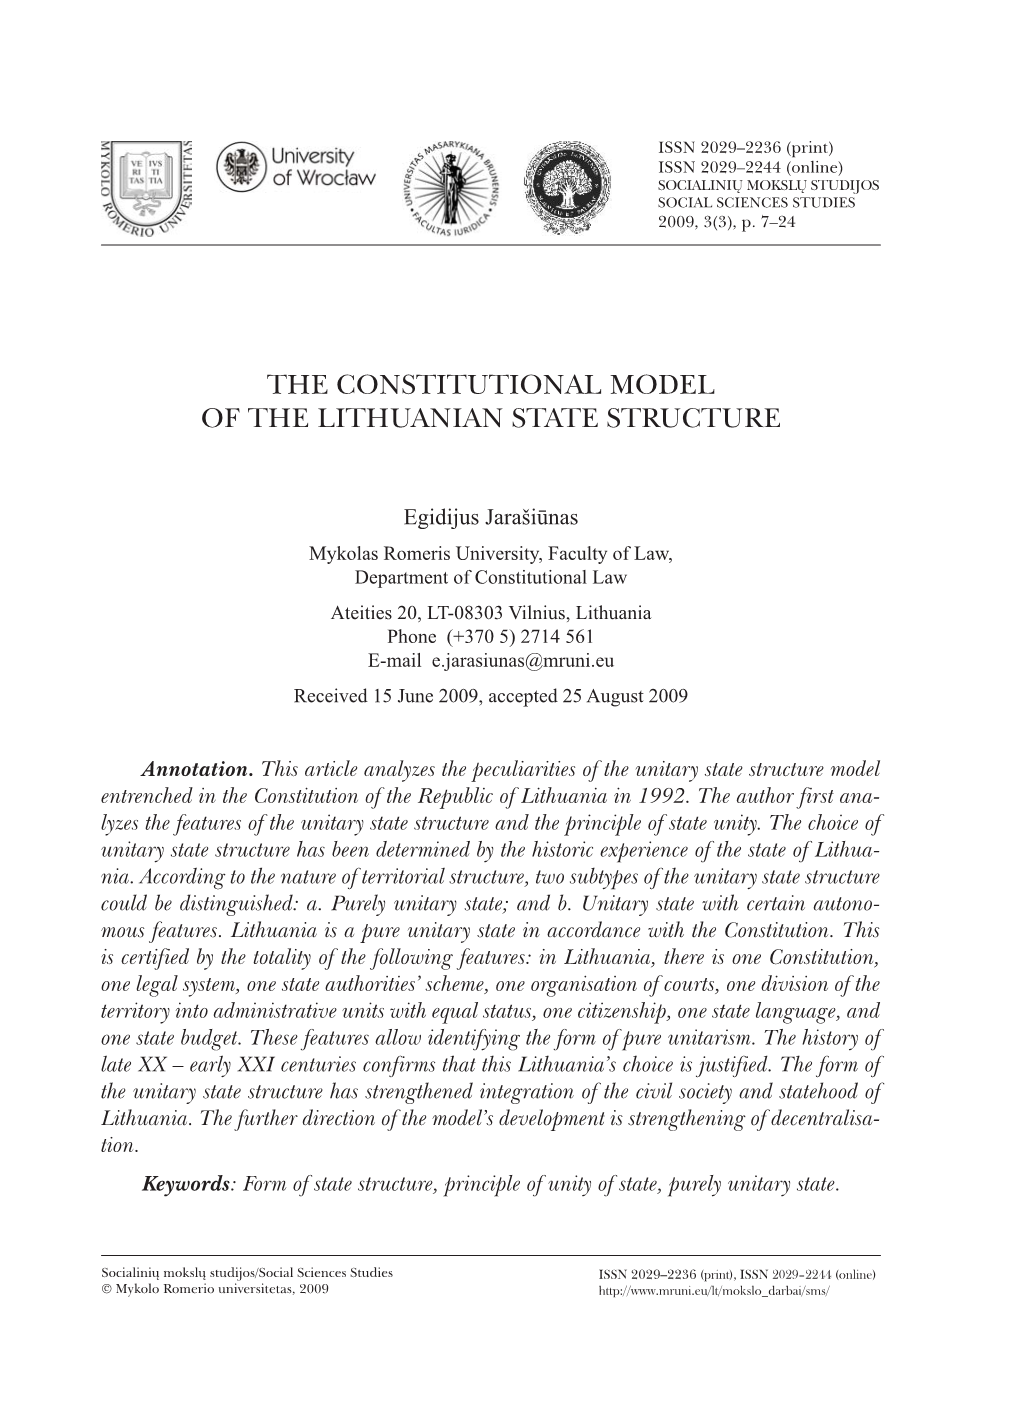 The Constitutional Model of the Lithuanian State Structure